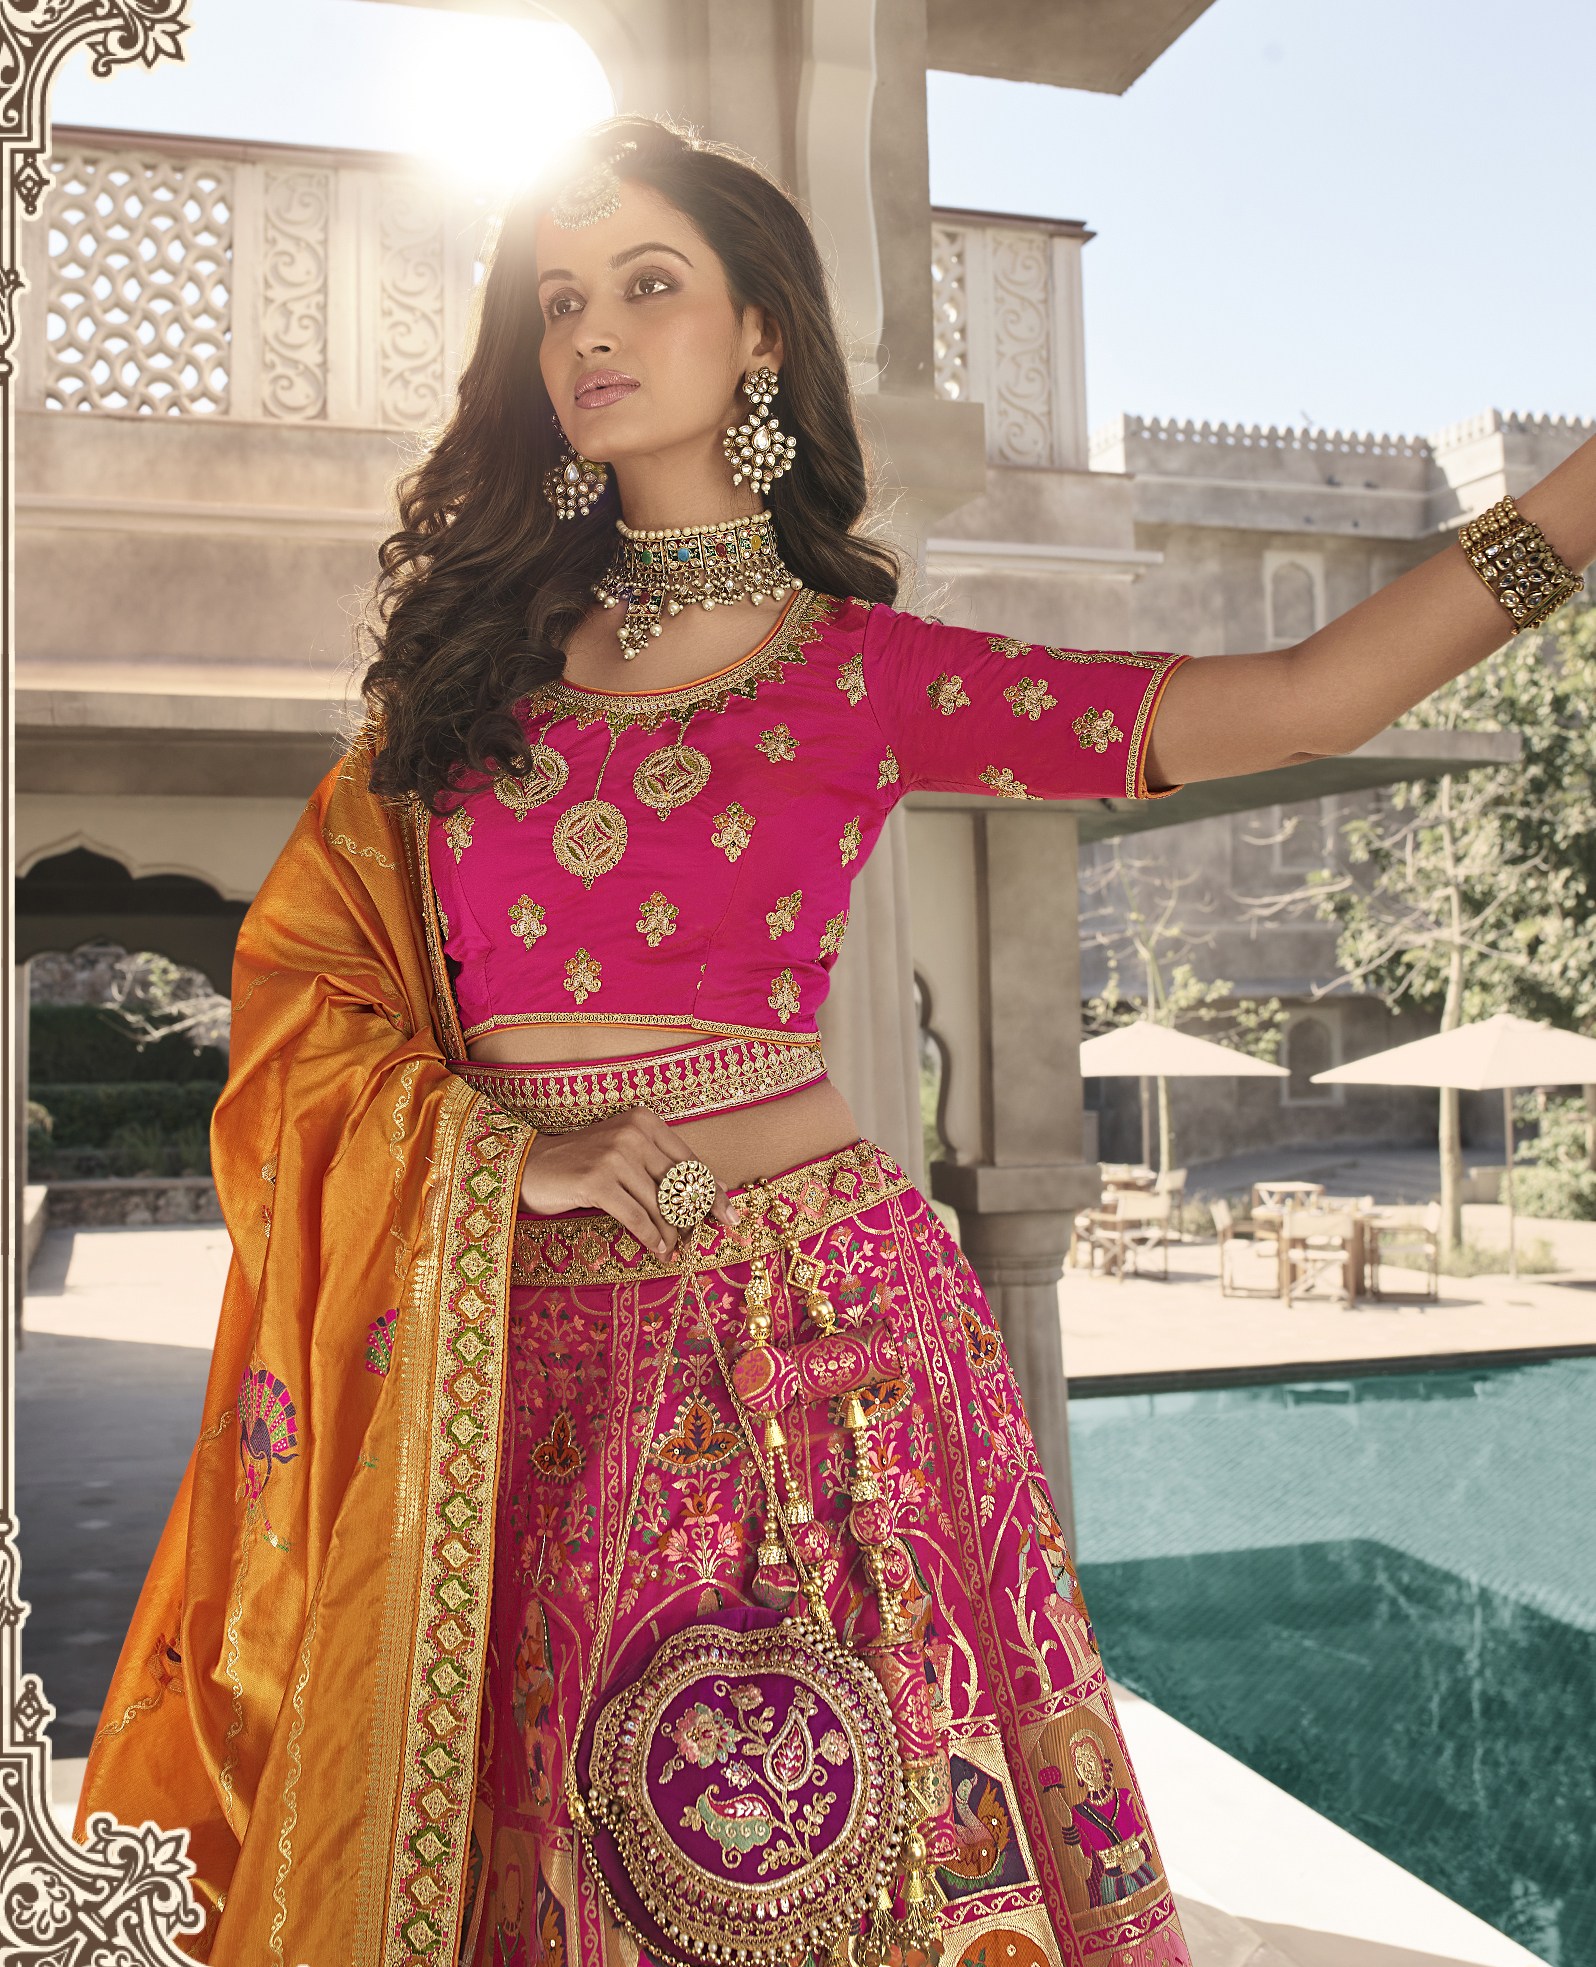 Get Some Trendy Wedding Lehenga Colour Combinations For Your Wedding – OYO  Hotels: Travel Blog